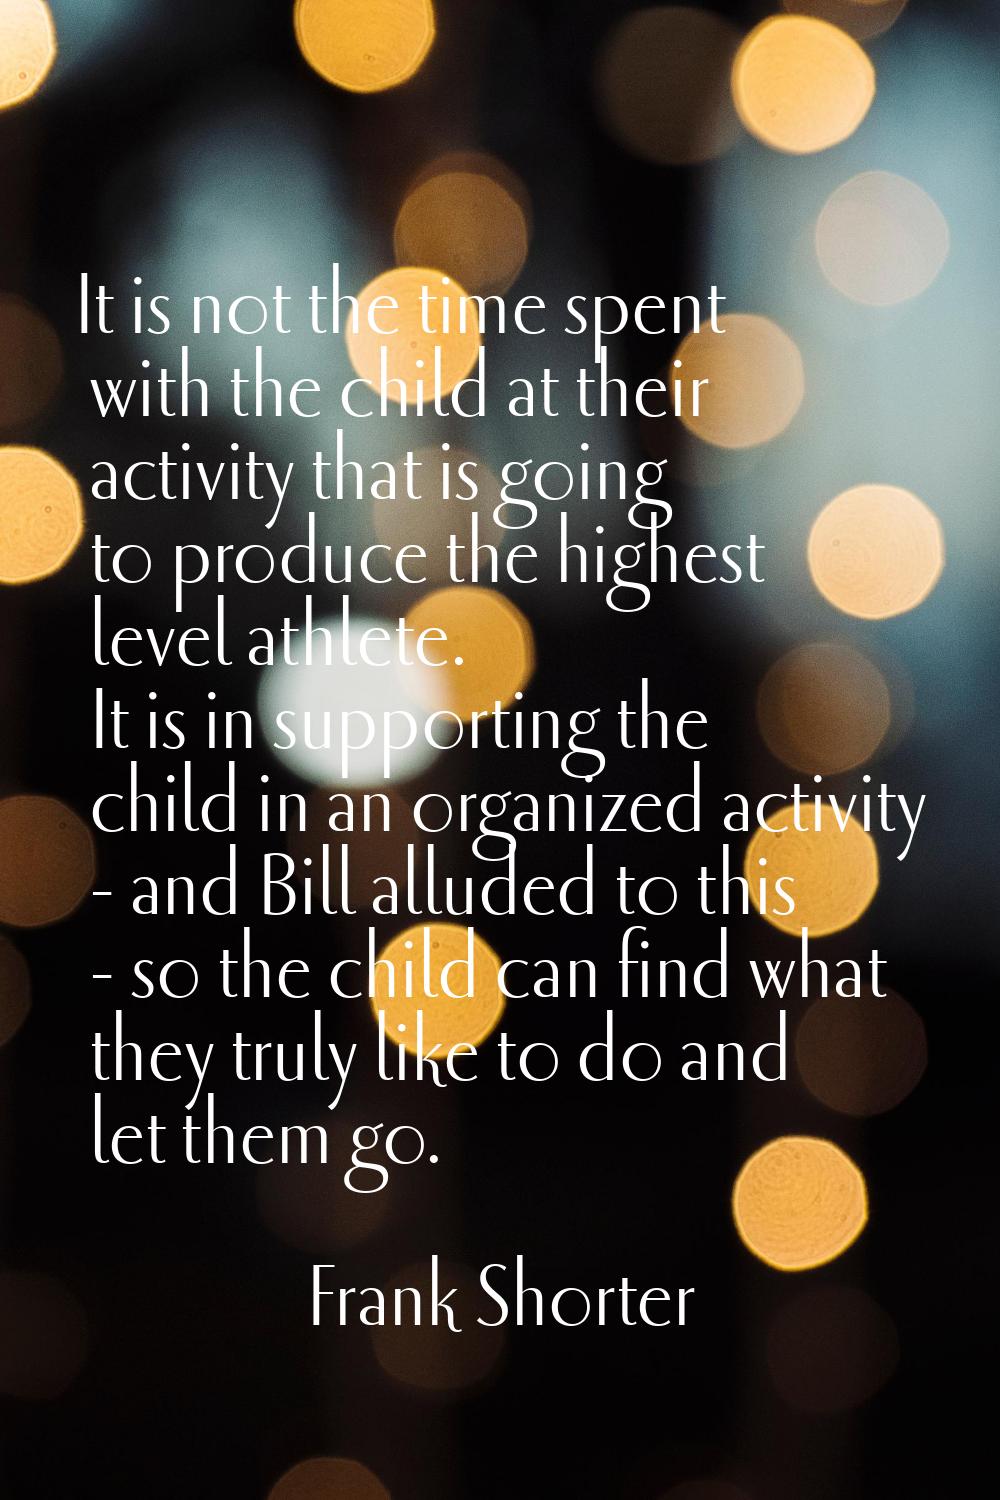 It is not the time spent with the child at their activity that is going to produce the highest leve